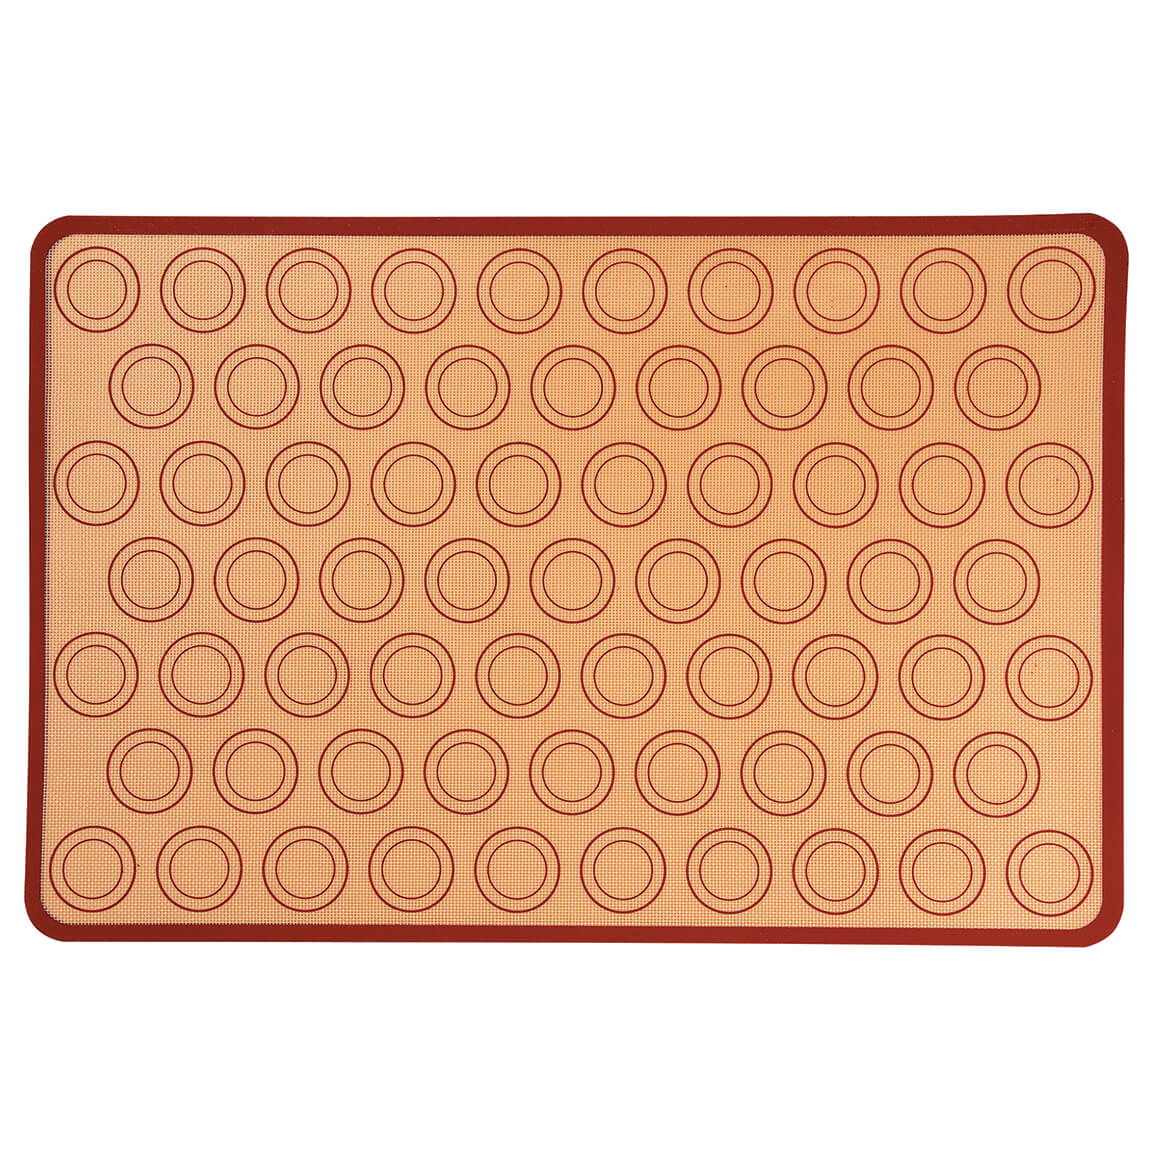 Silicone Baking Mat Set of 6 by Home Marketplace